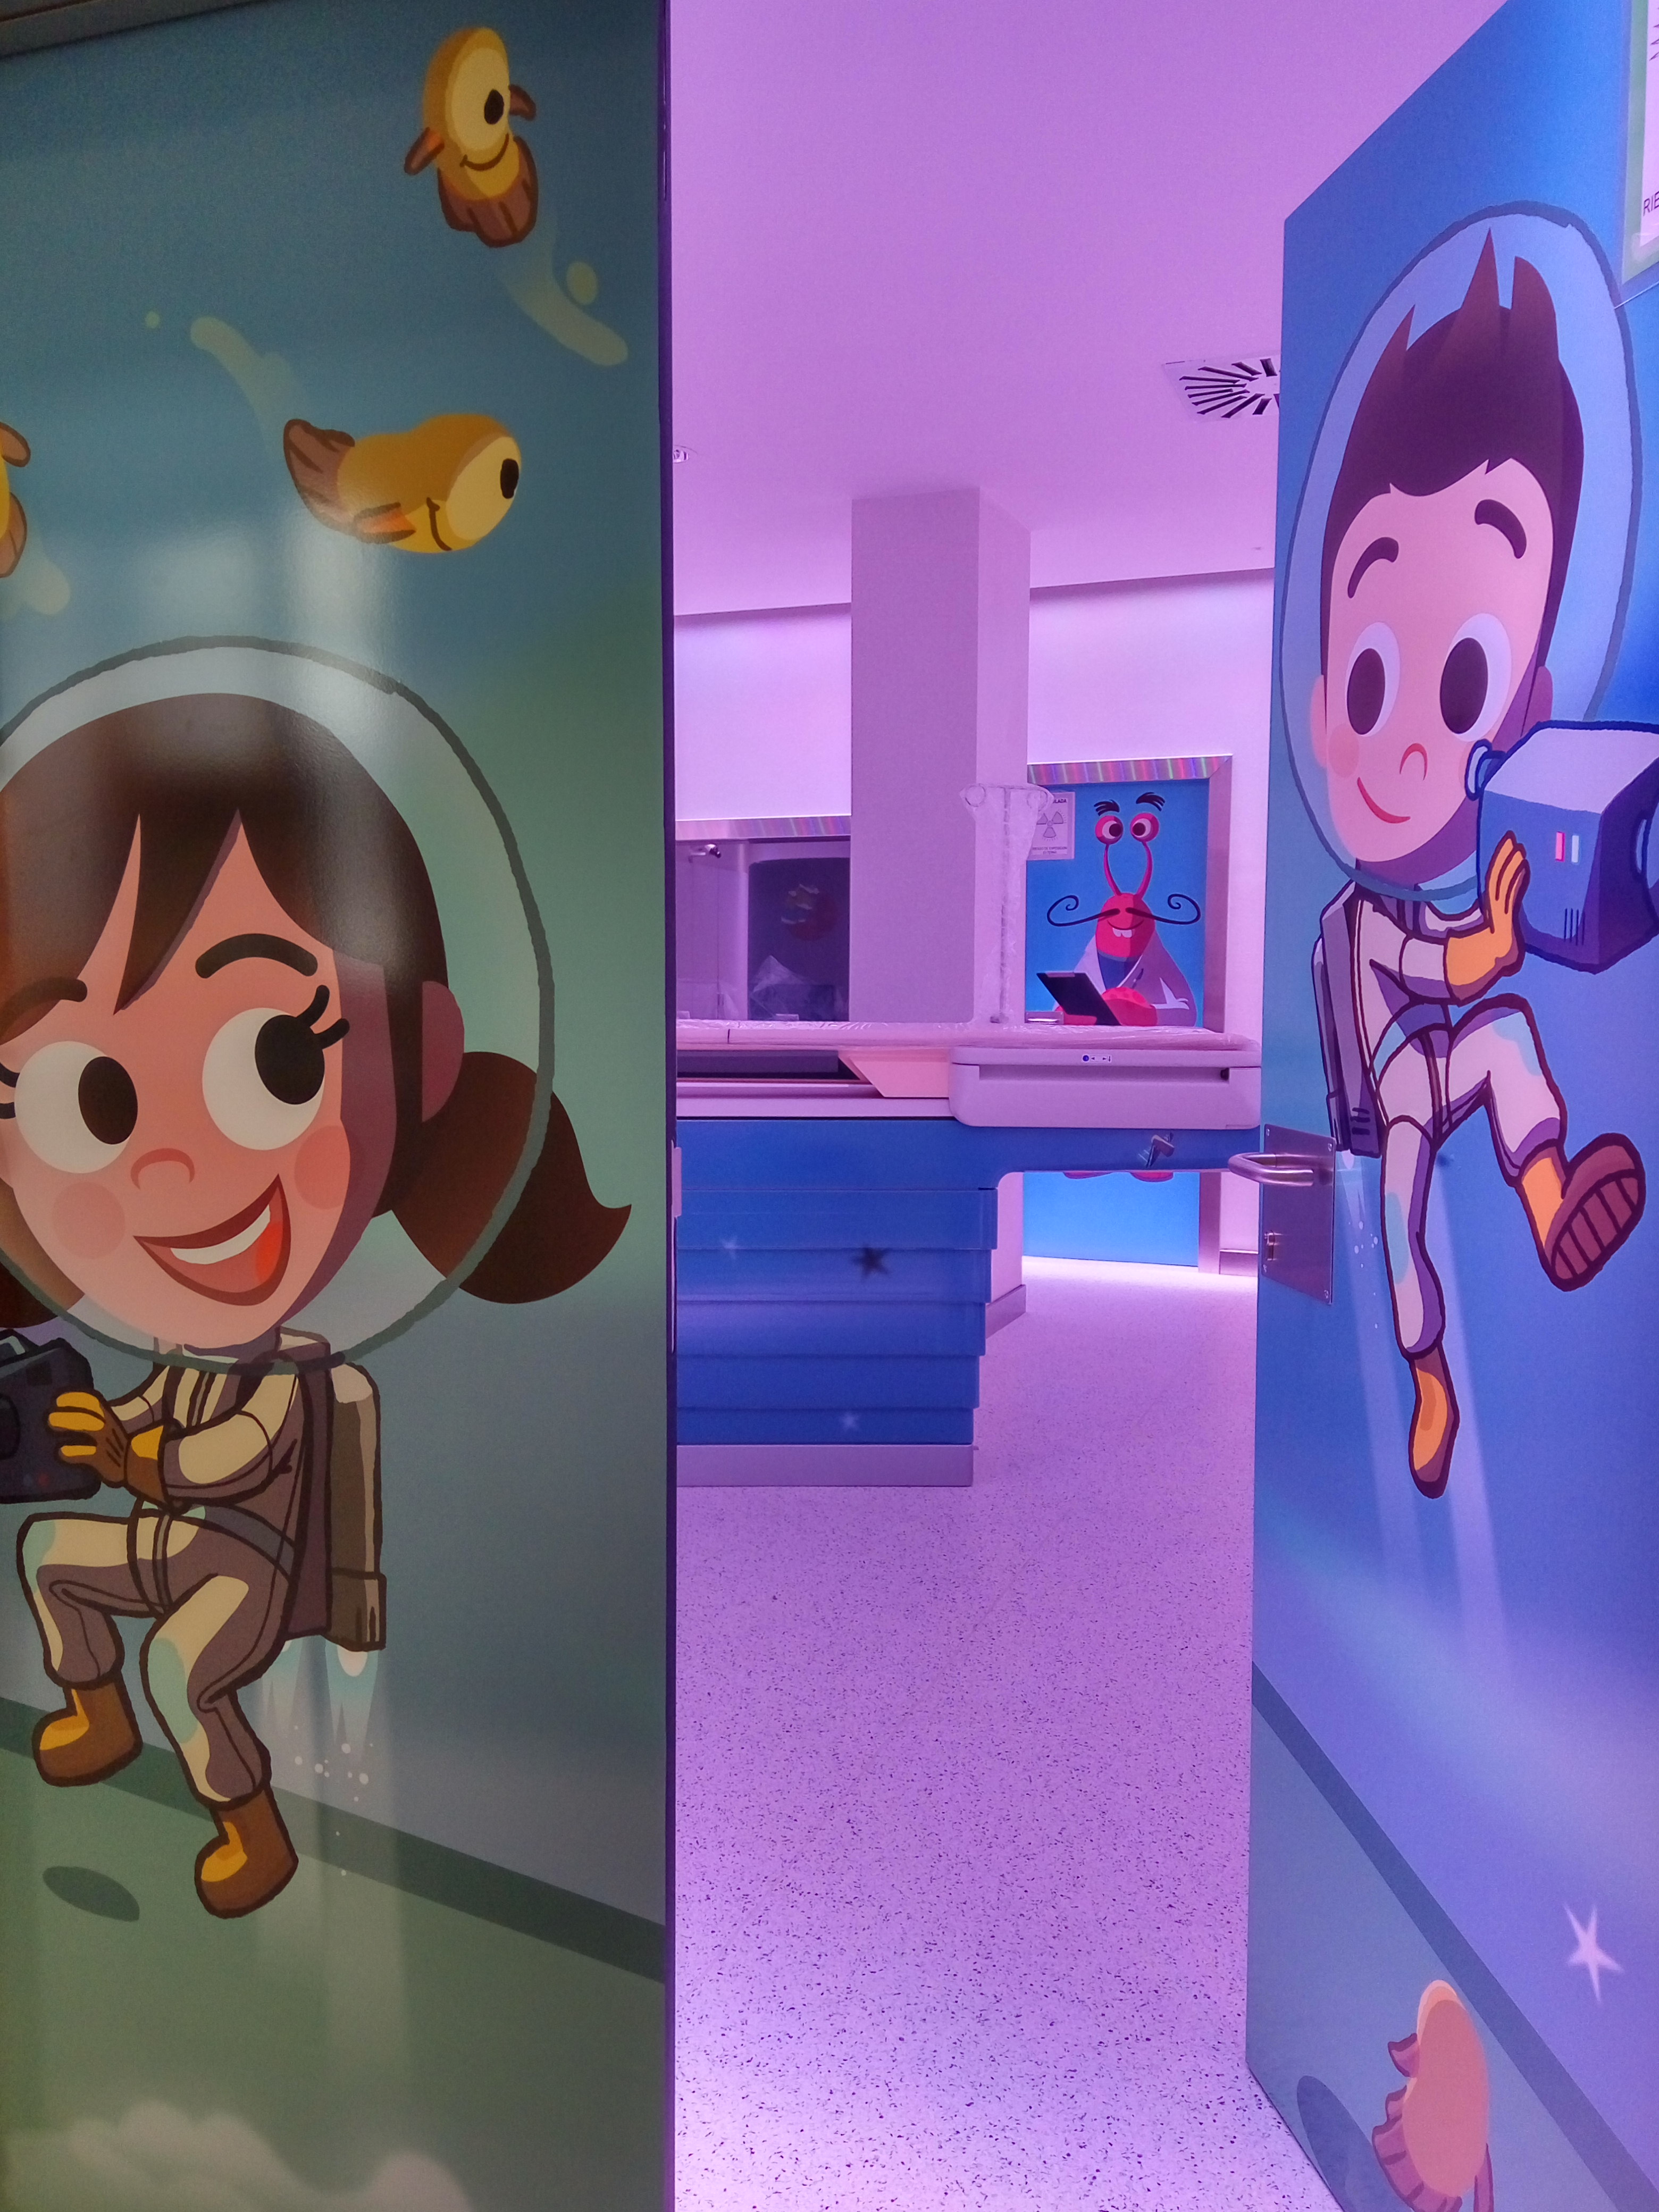 The Philips Foundation, CurArte Foundation and Hospital Vall d´Hebrón to improve the experience children have during diagnostic imaging tests